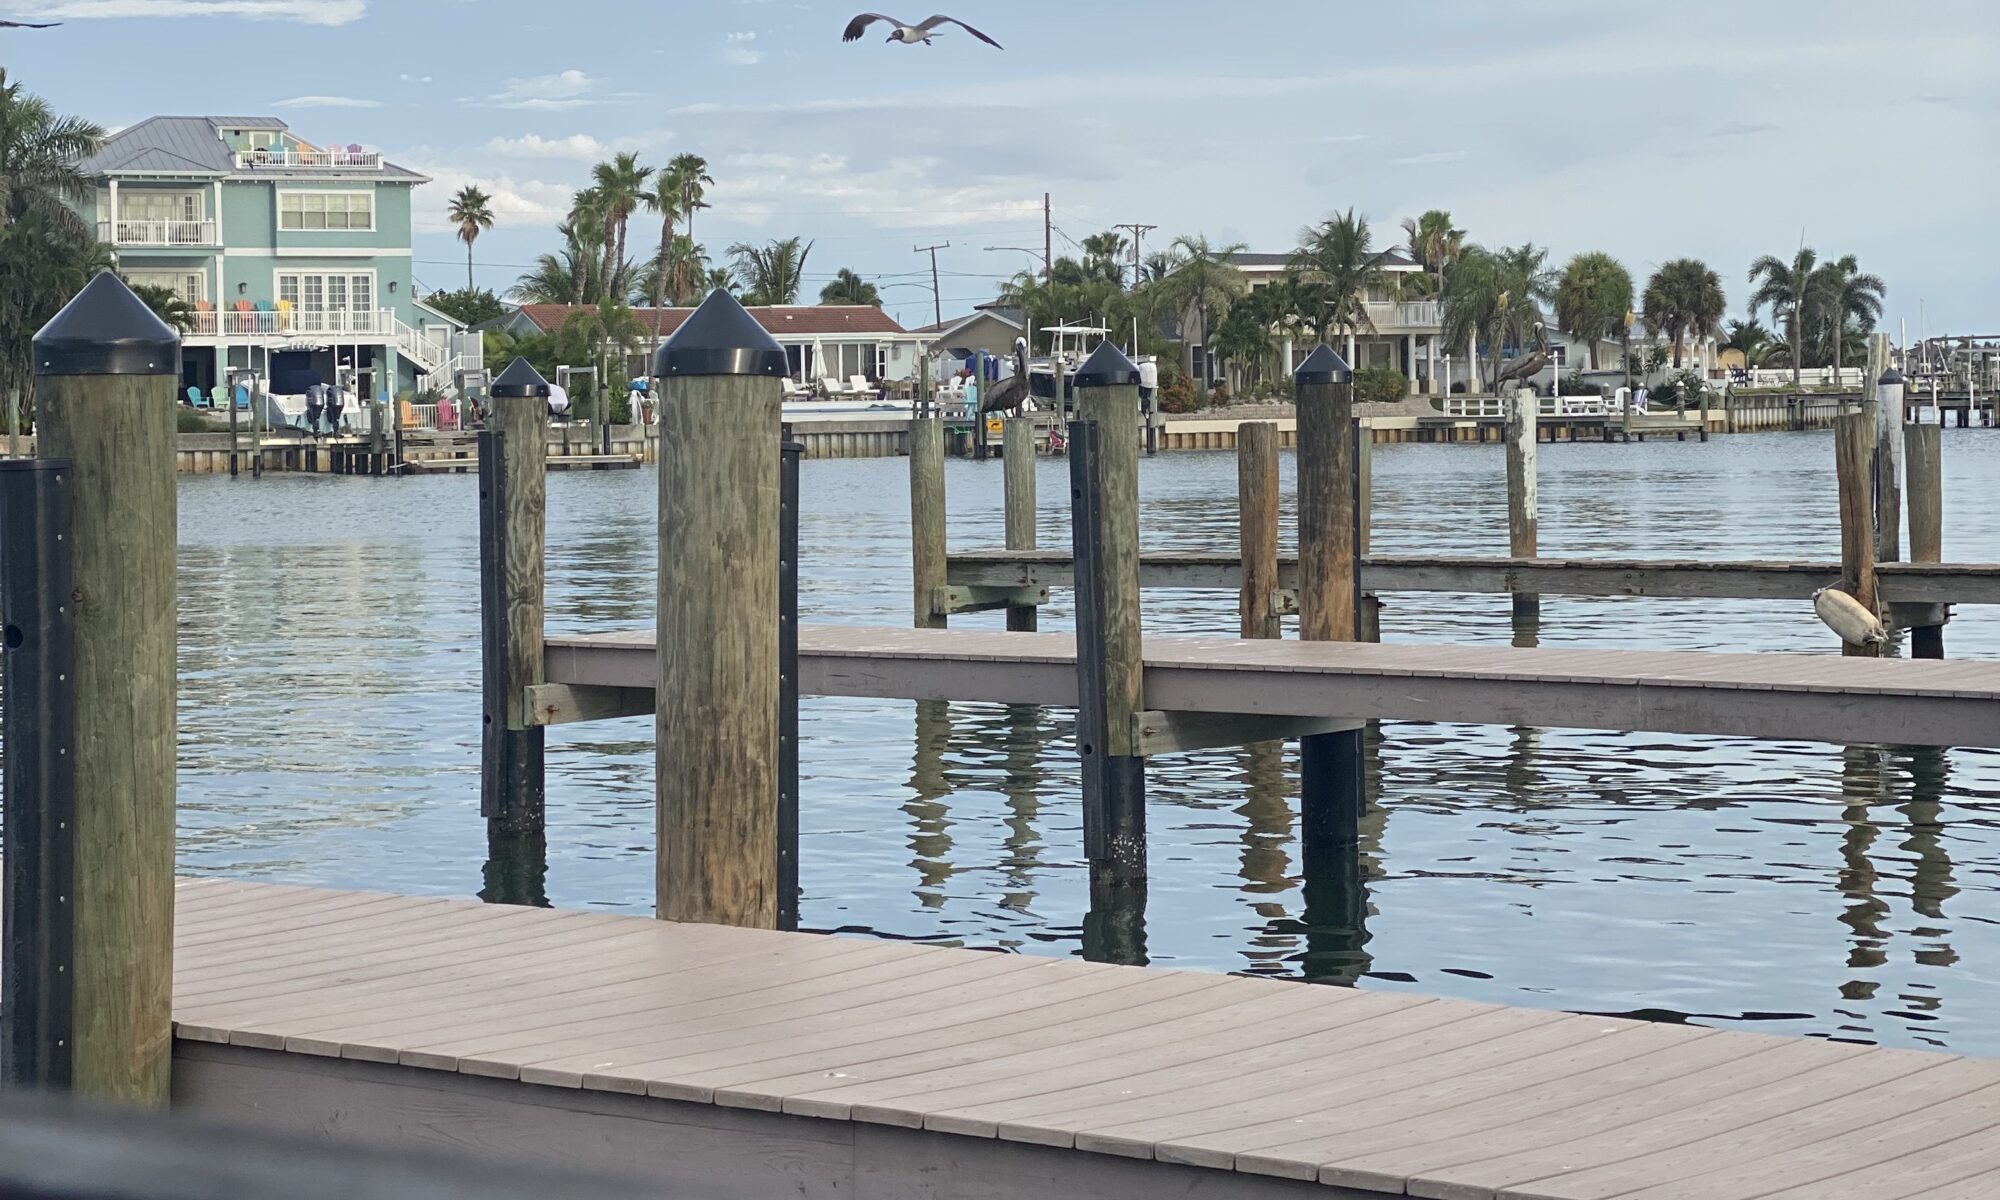 Snapshot of the Tampa Bay near a boat dock. There are houses in the background and bird, perhaps a sea gull, flying low.